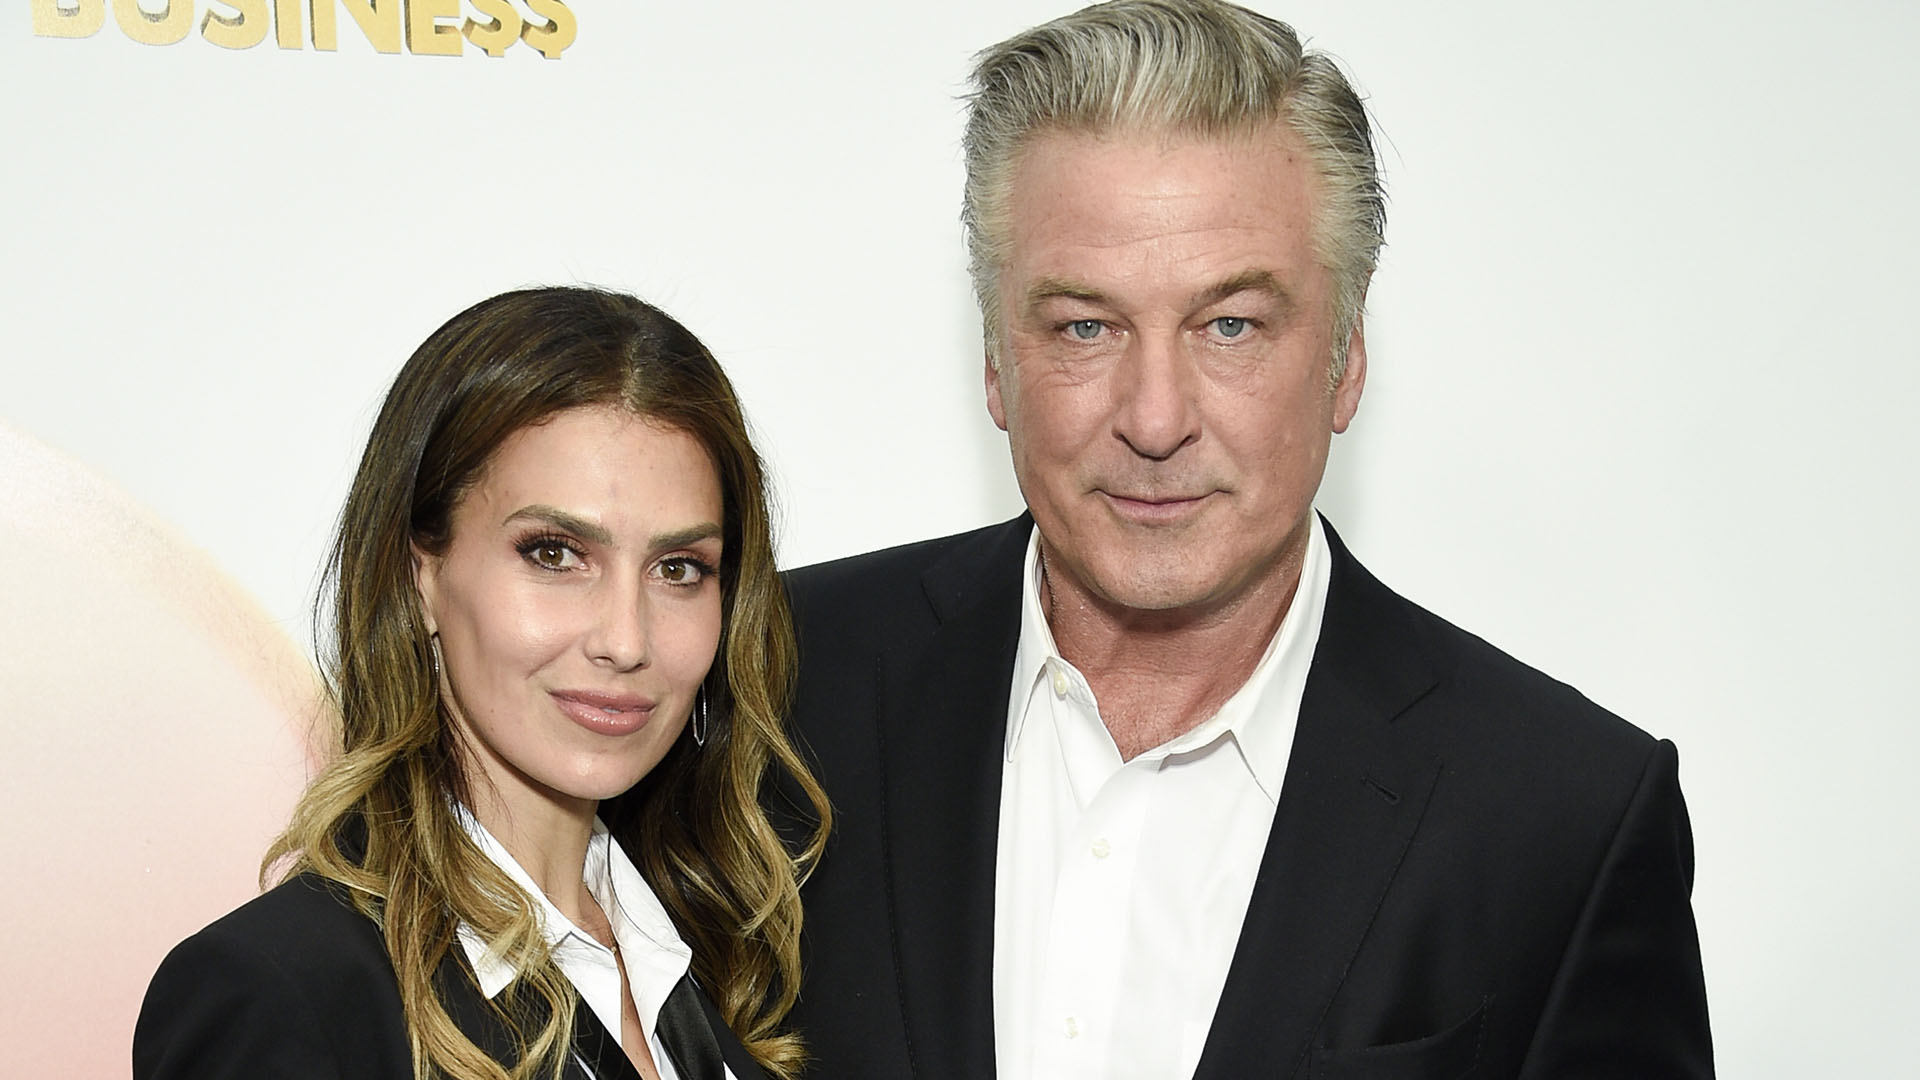 Actor Alec Baldwin and Hilaria Thomas at the world premiere of "The Boss Baby: Family Business" on Tuesday, June 22, 2021, in New York.